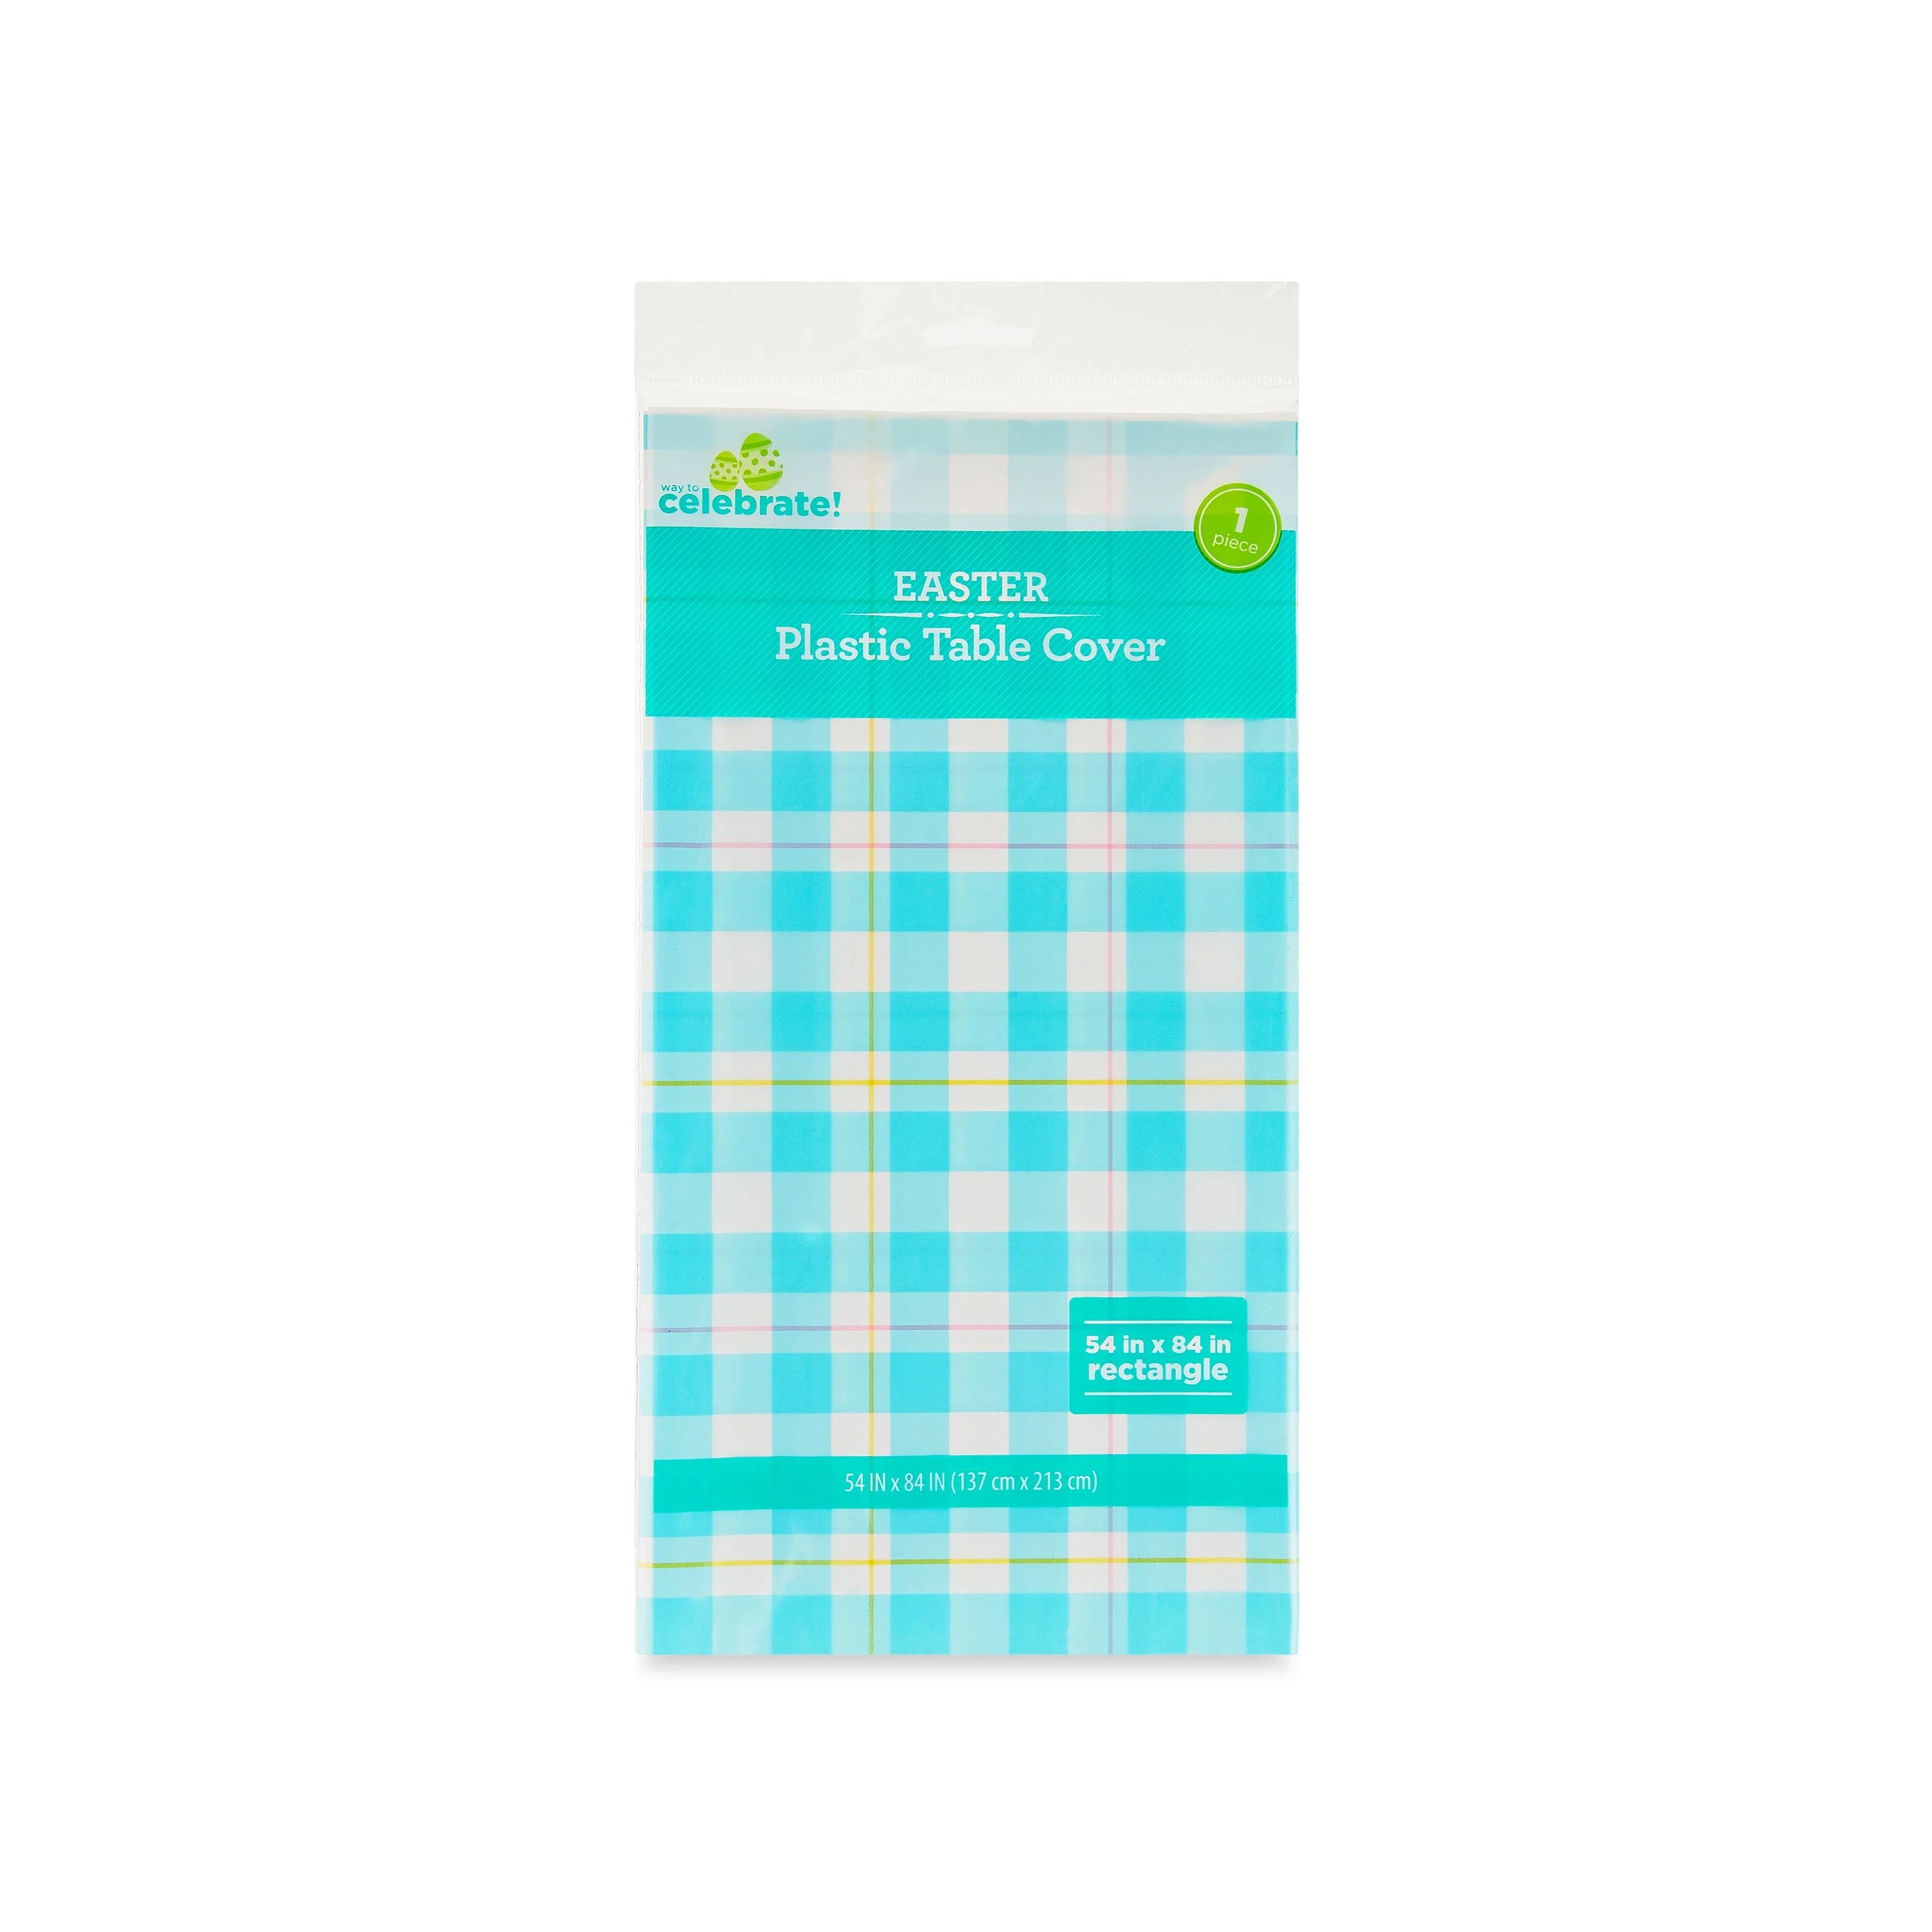 Easter Blue Gingham Plastic Tablecloth, 54" x 84, by Way To Celebrate | Walmart (US)